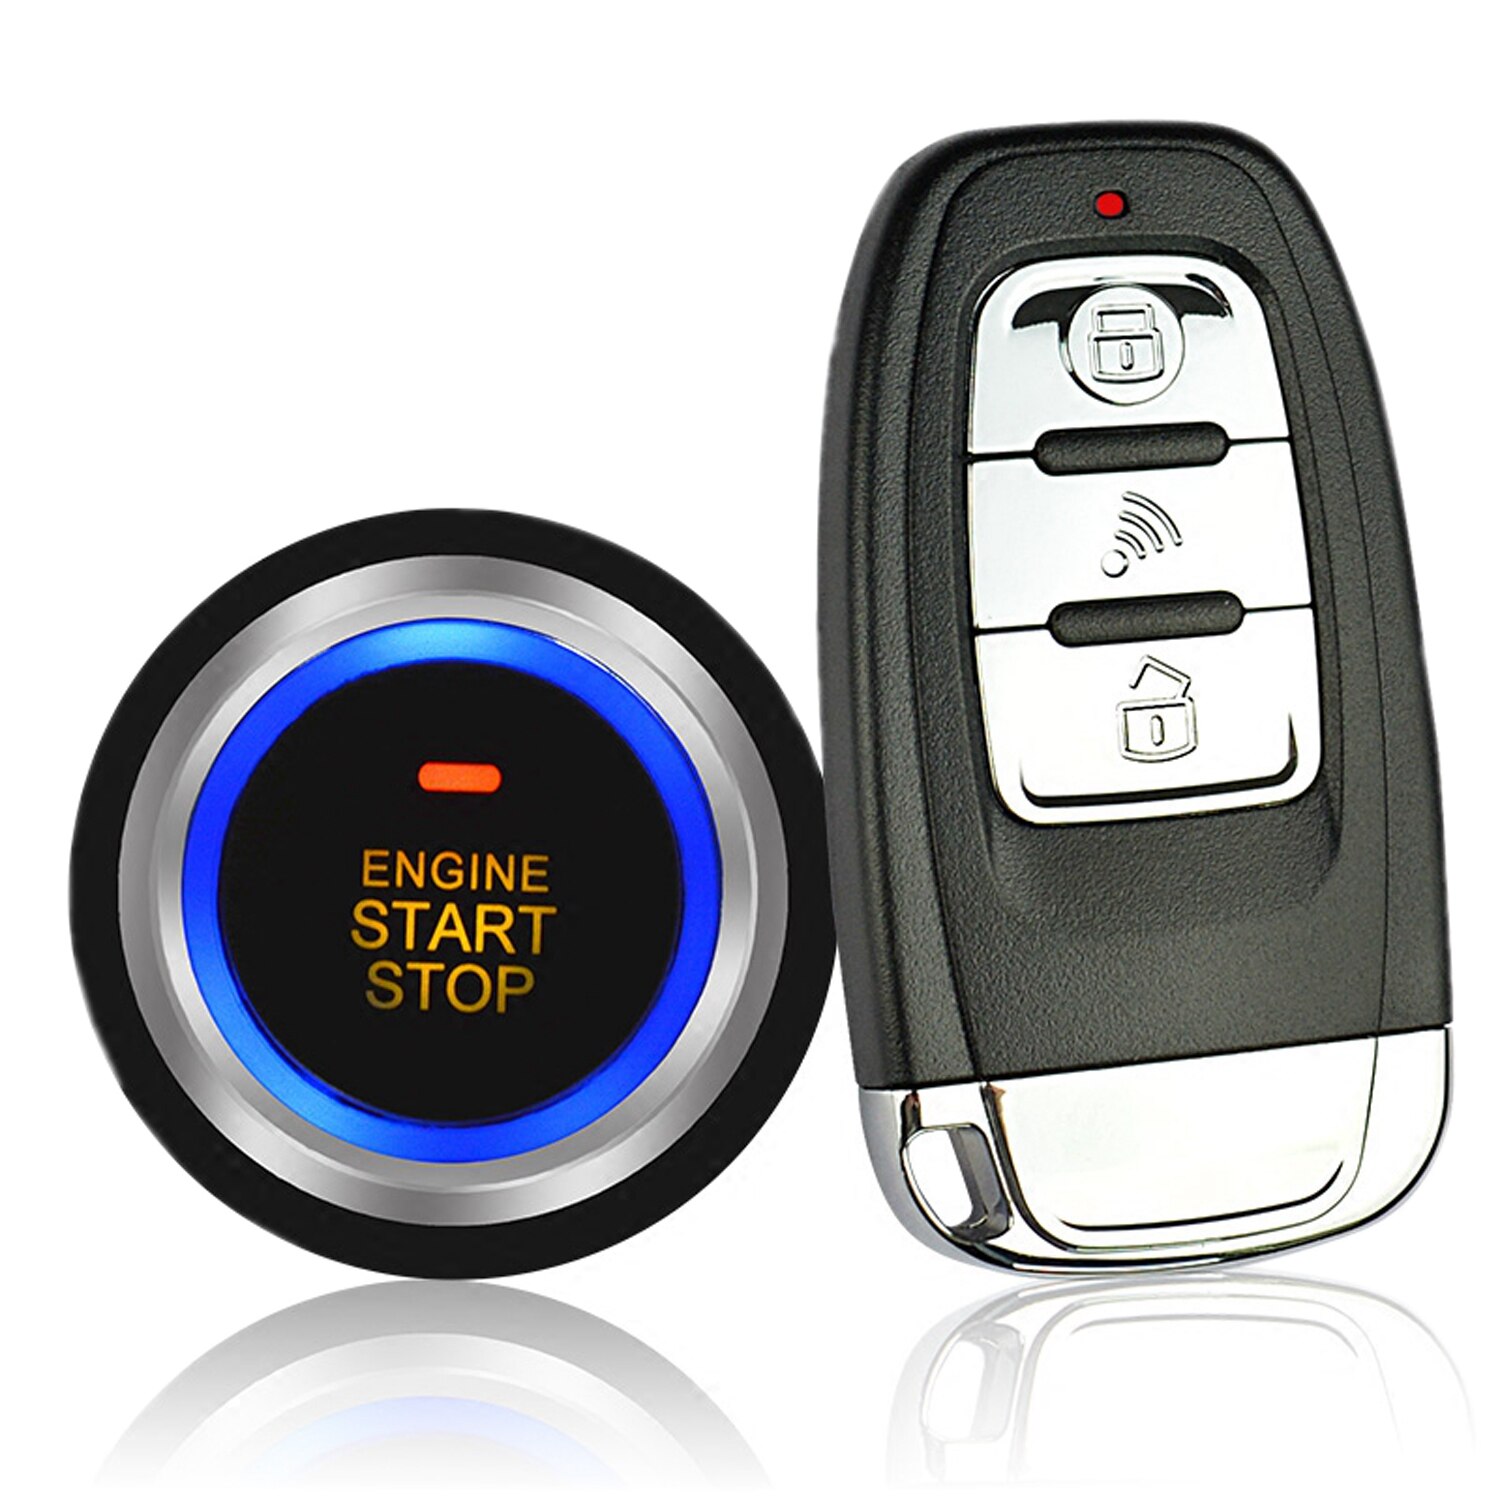 12V Universal One-click Boot System Modify Keyless Access System Alarm System Remote Starts Remote Control Auto Car